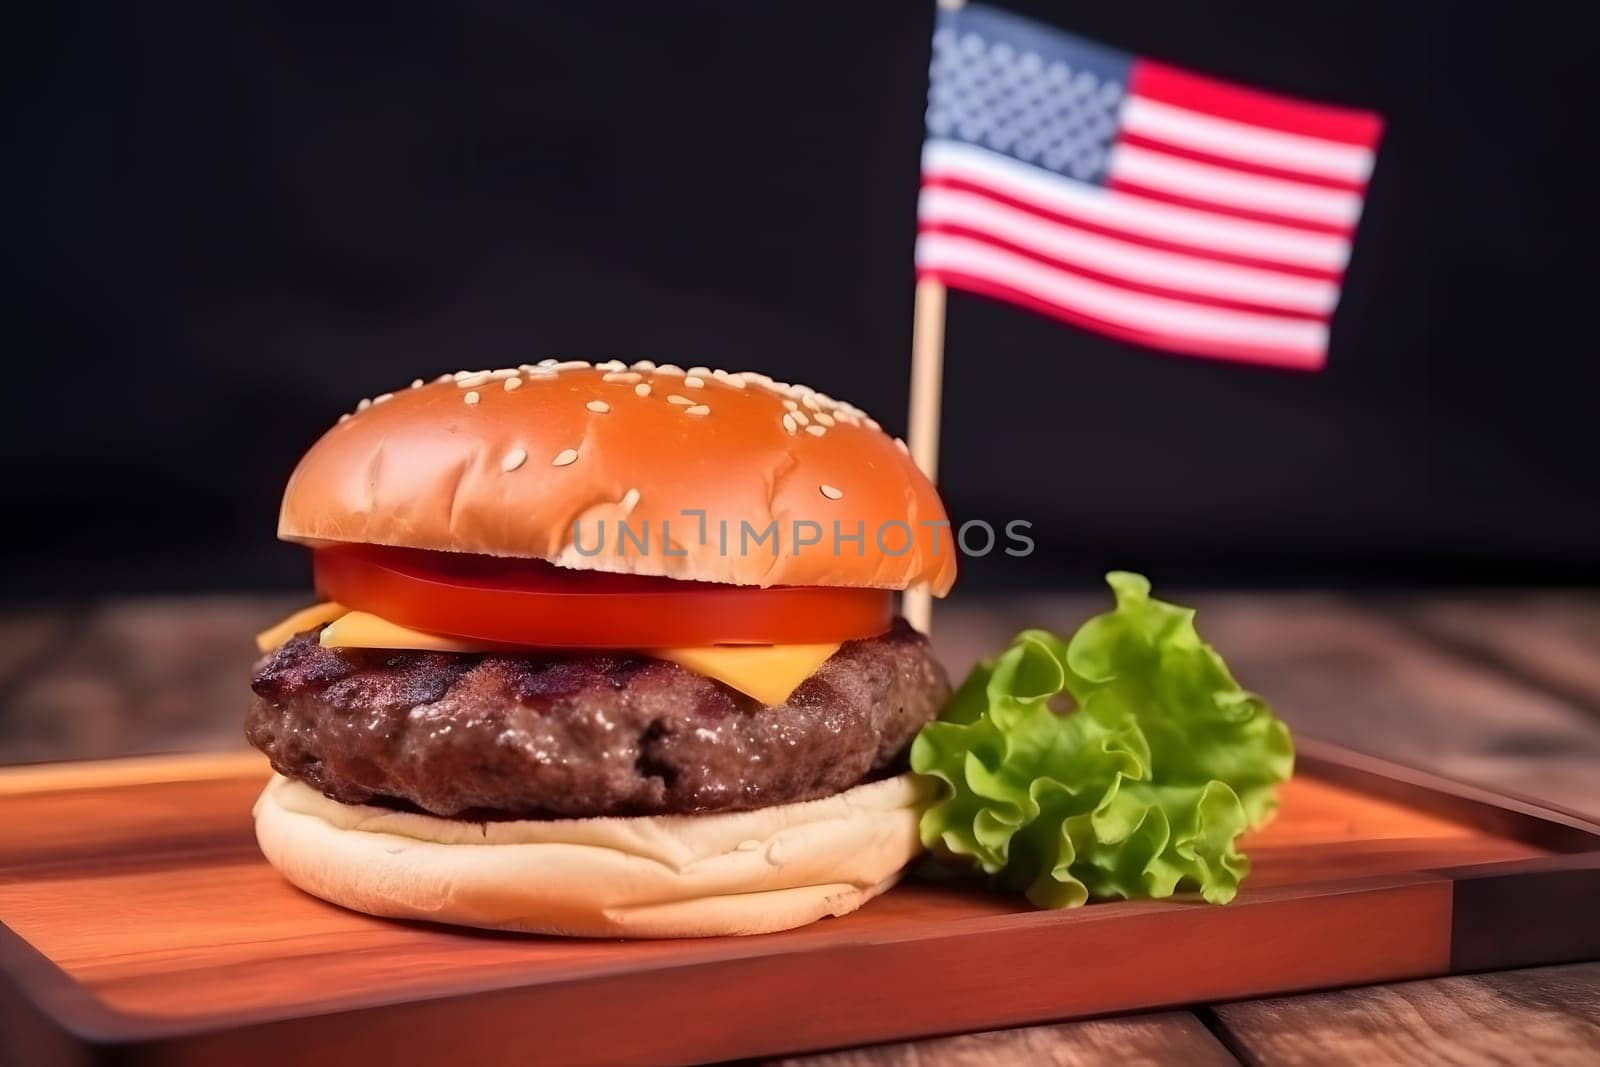 small hamburger with small american flag on it, dark background, US patriotic proud theme, neural network generated image by z1b